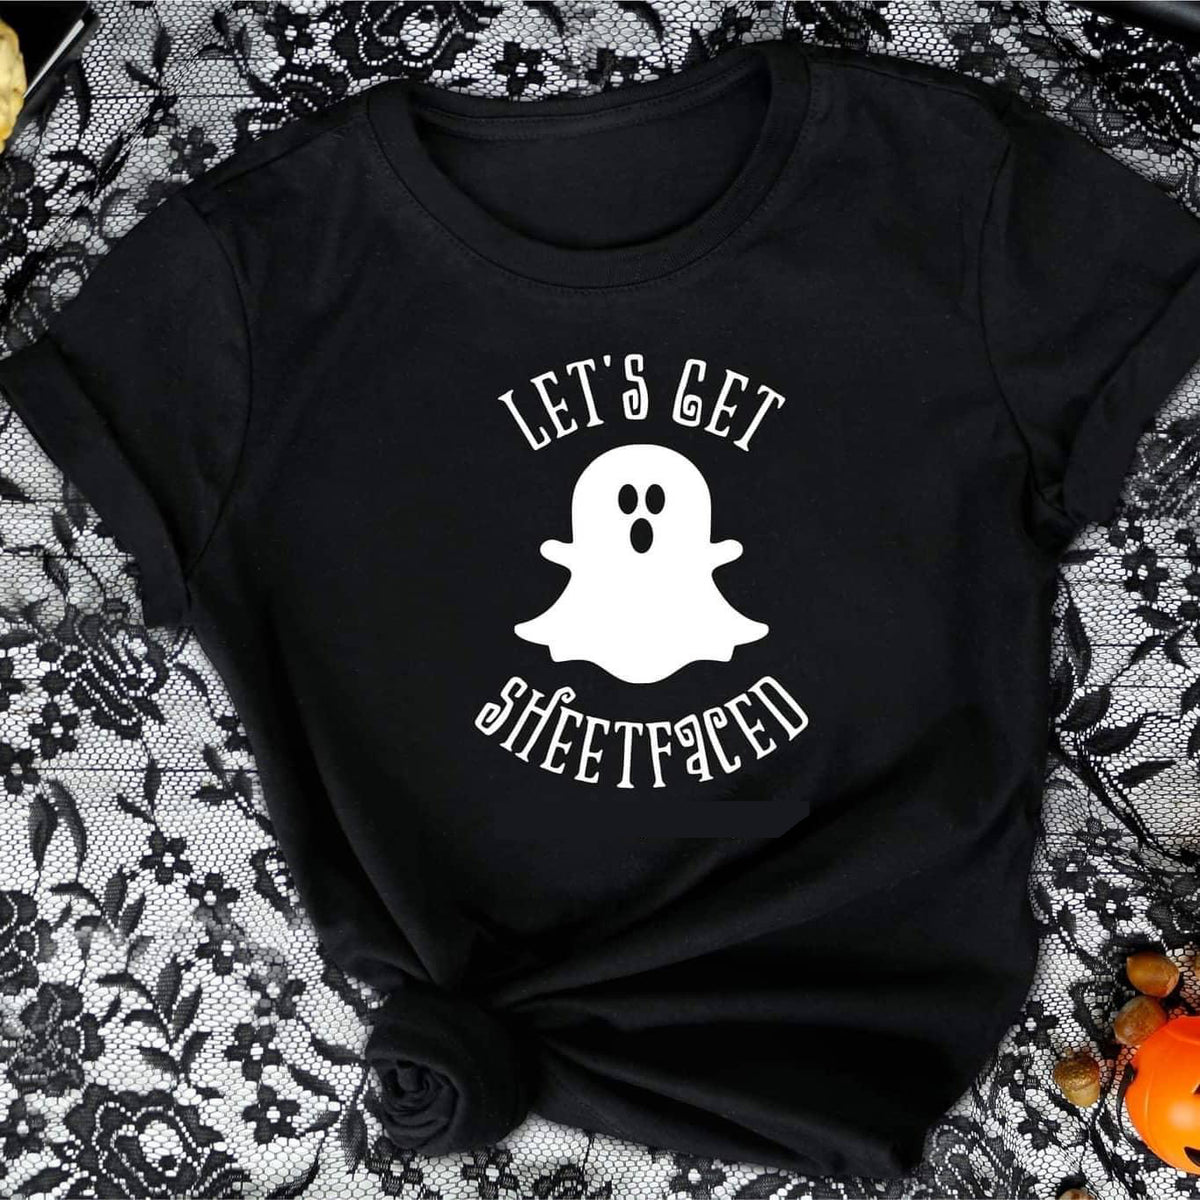 Let's Get Sheetfaced Graphic Tee